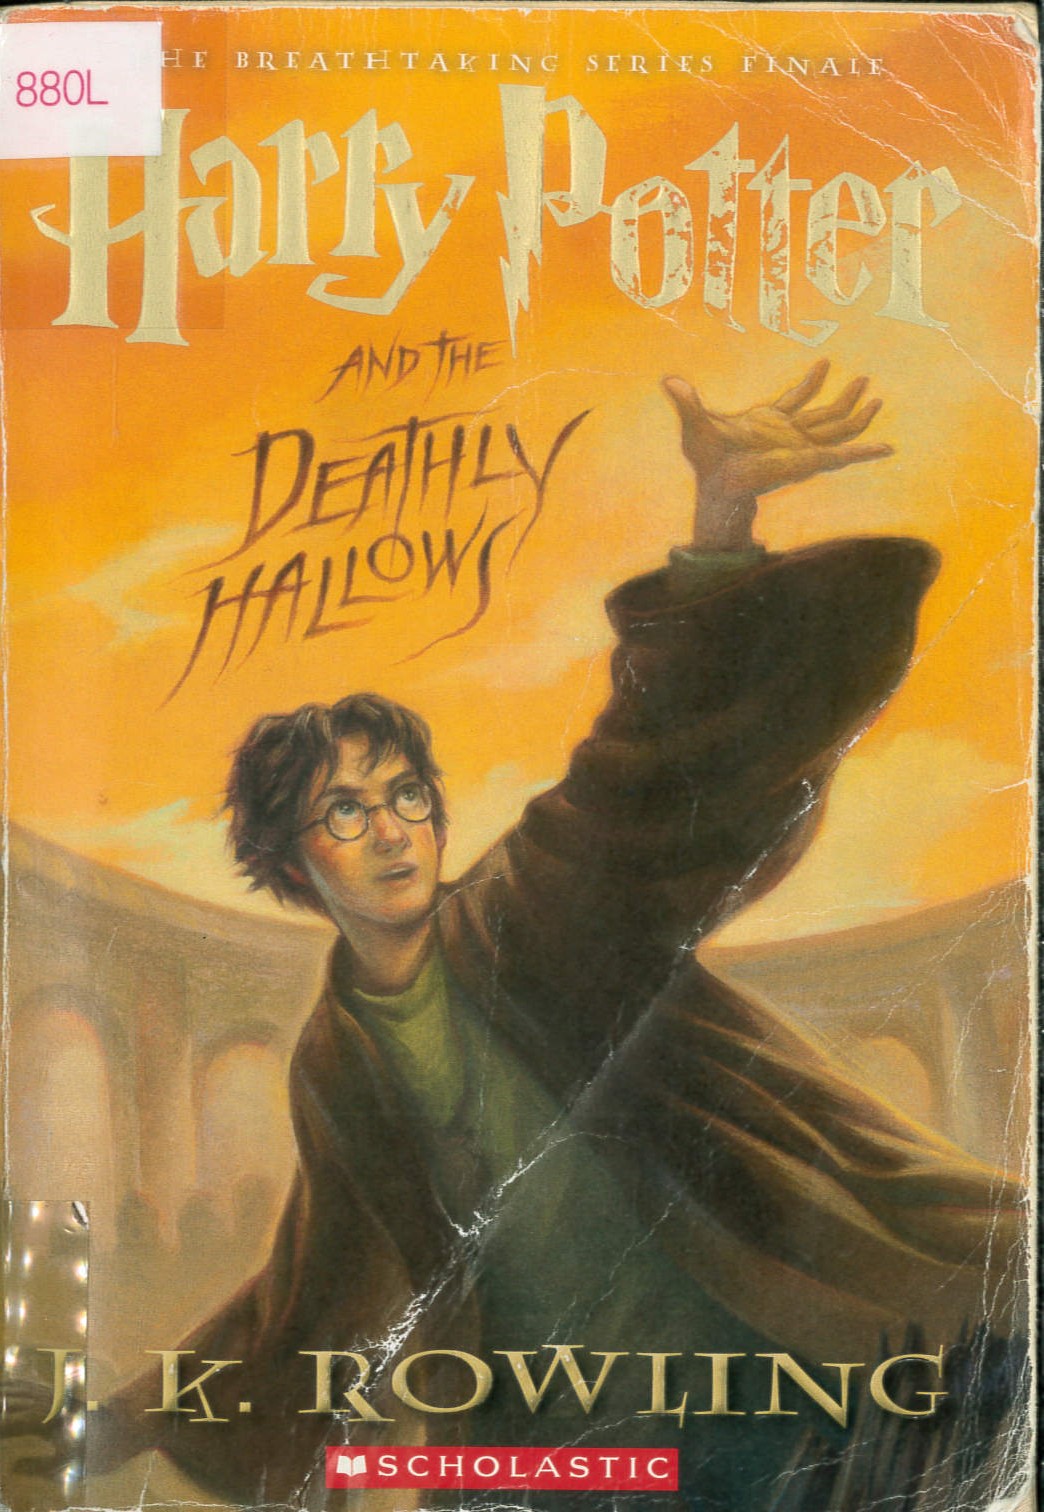 Harry Potter and the Deathly Hallows /